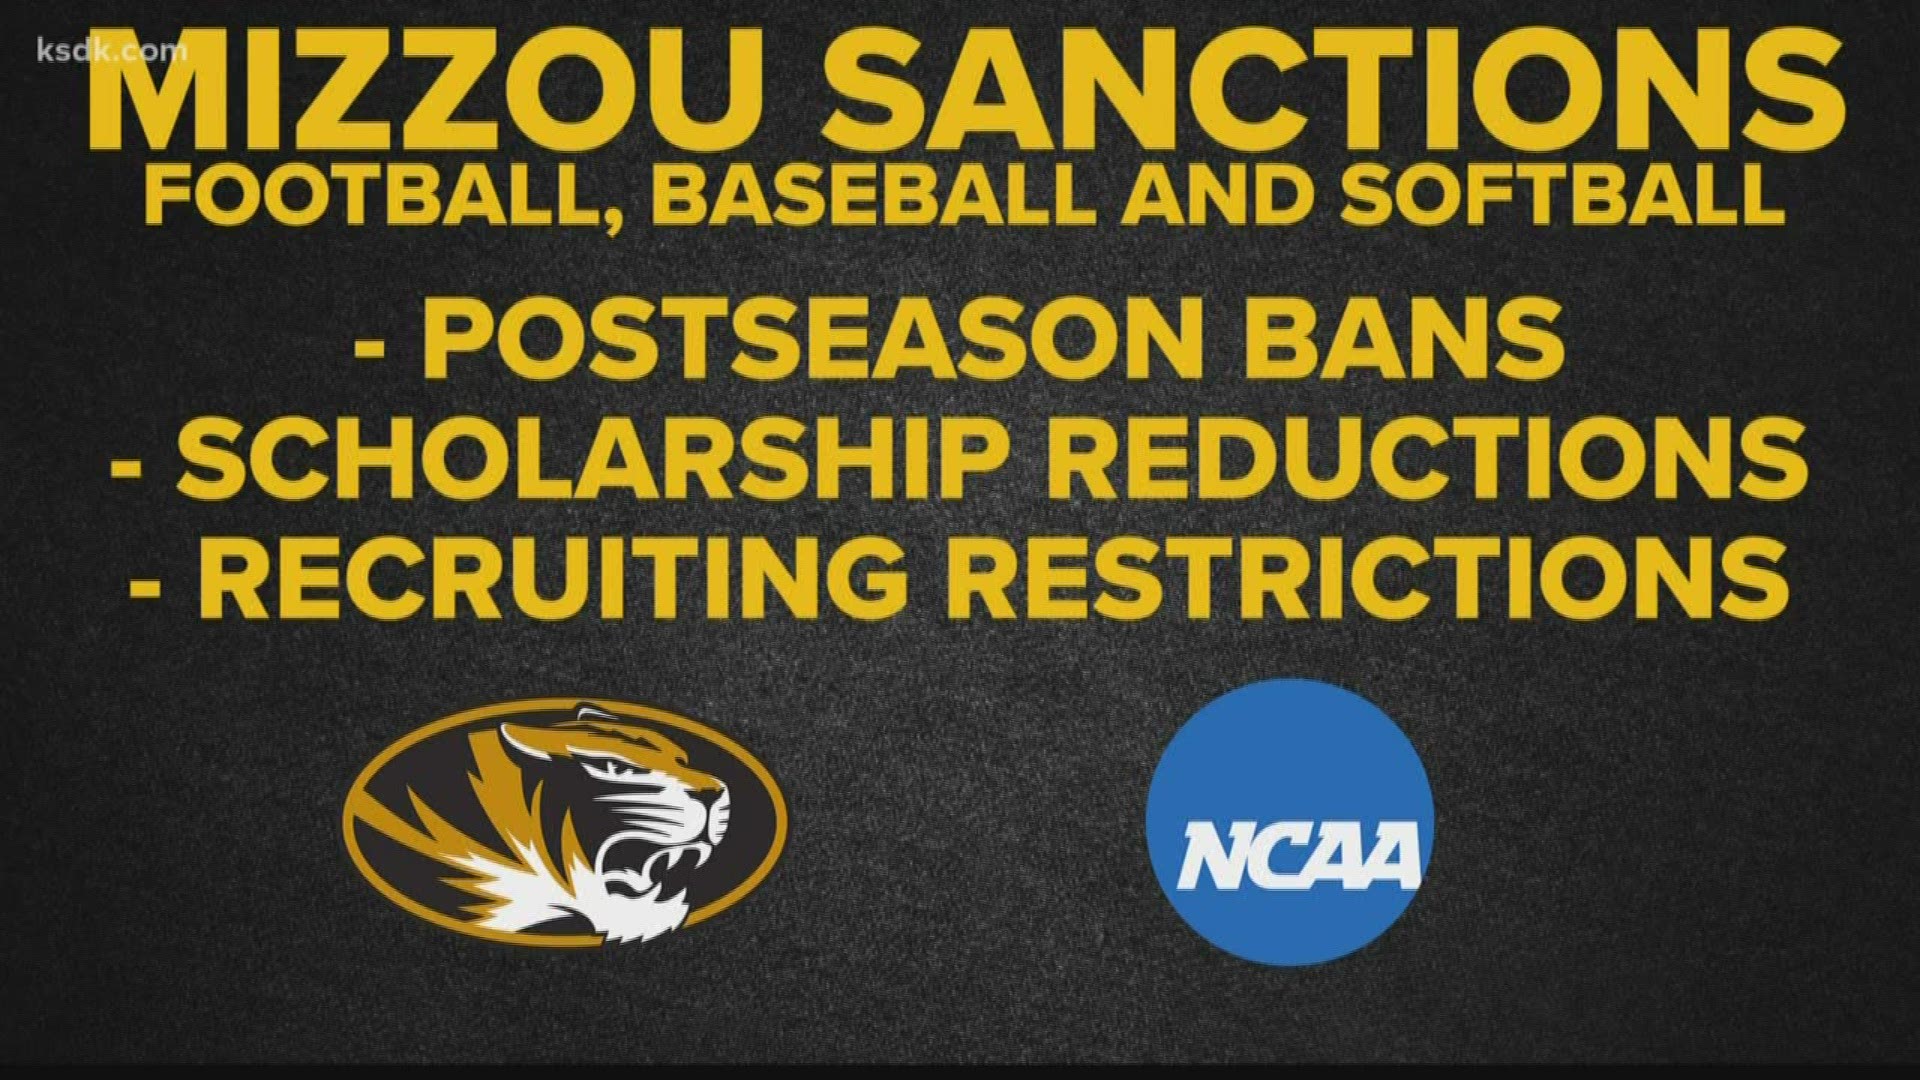 300 days after the NCAA's initial sanctions were imposed, we finally know the fate for Mizzou athletics.